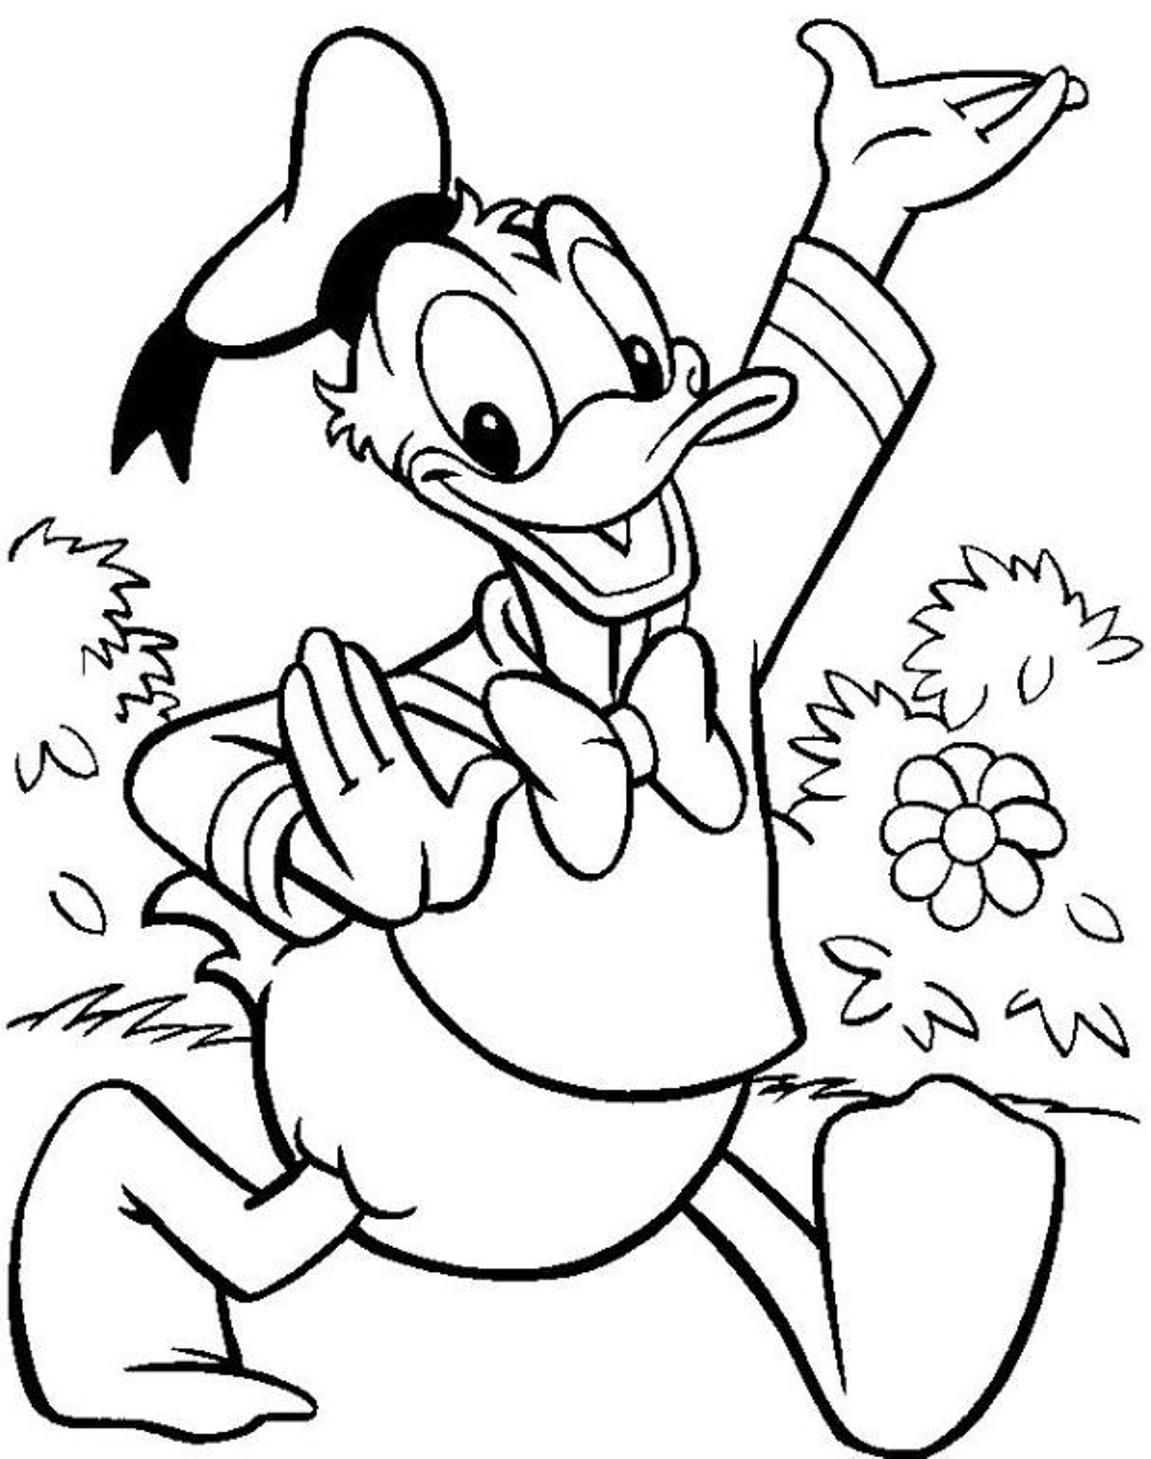 Printable Alphabet Coloring Pages D For Duck | Alphabet Coloring